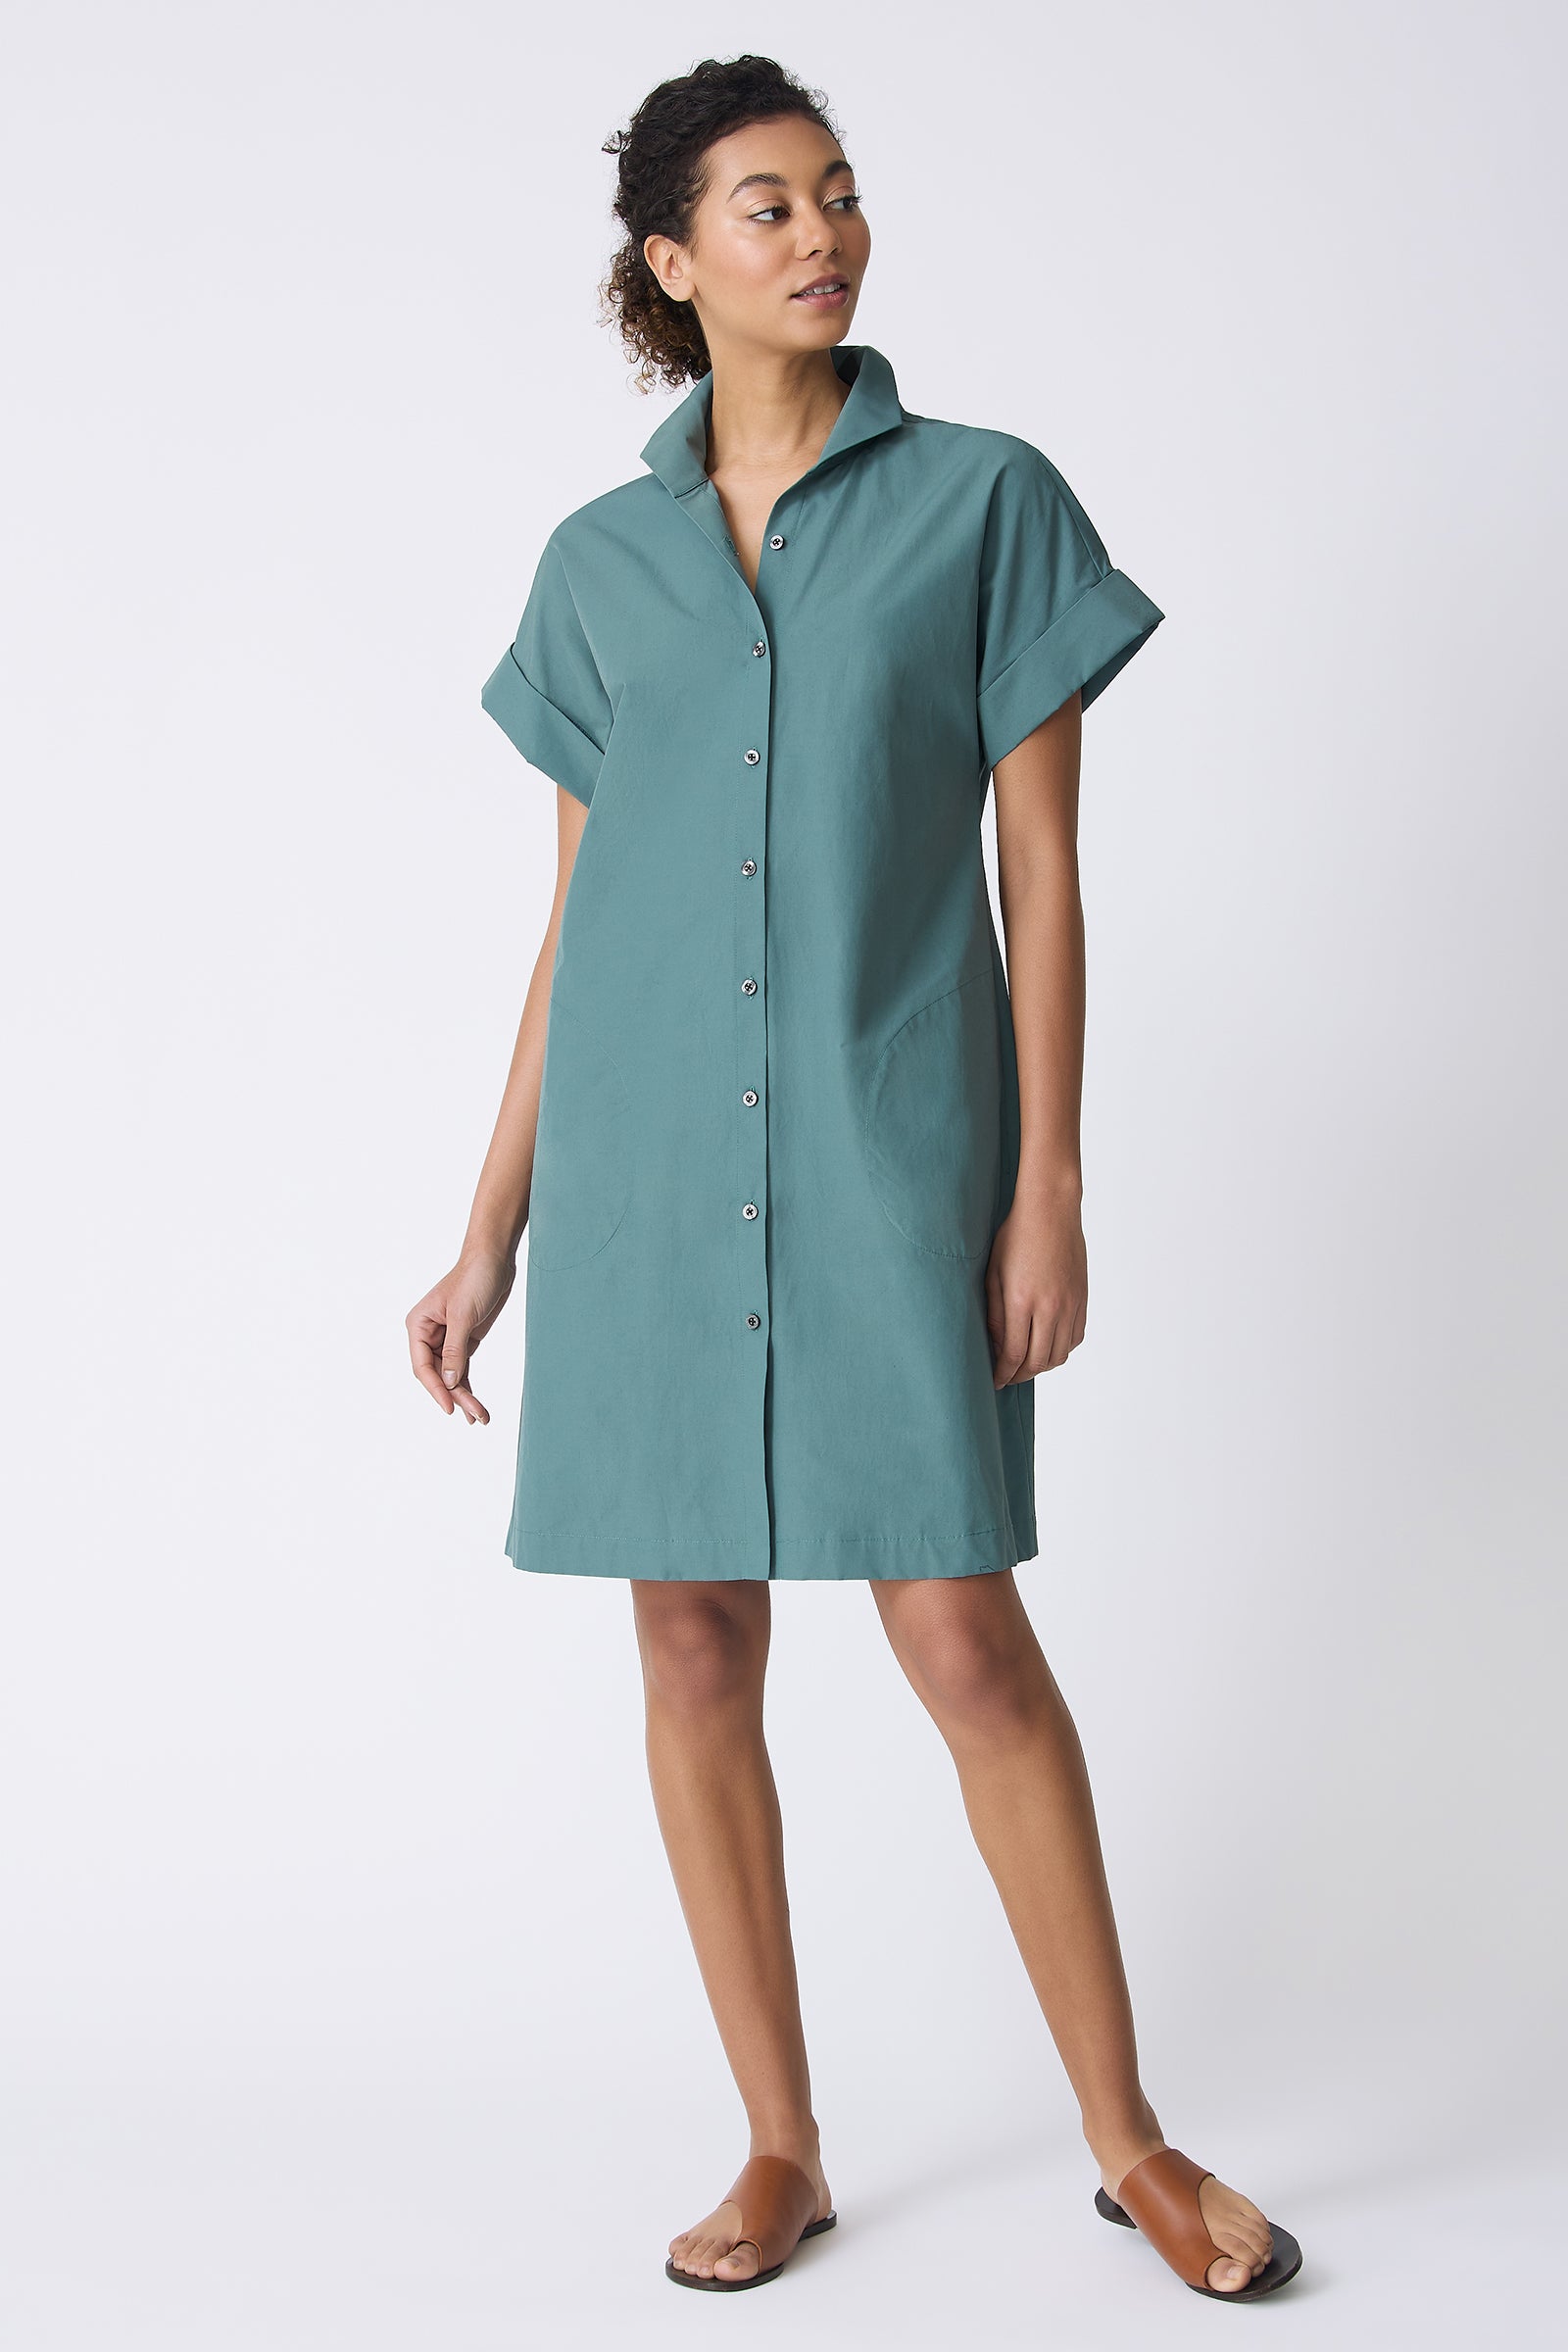 Kal Rieman Holly Kimono Dress in Sage on model looking left full front view